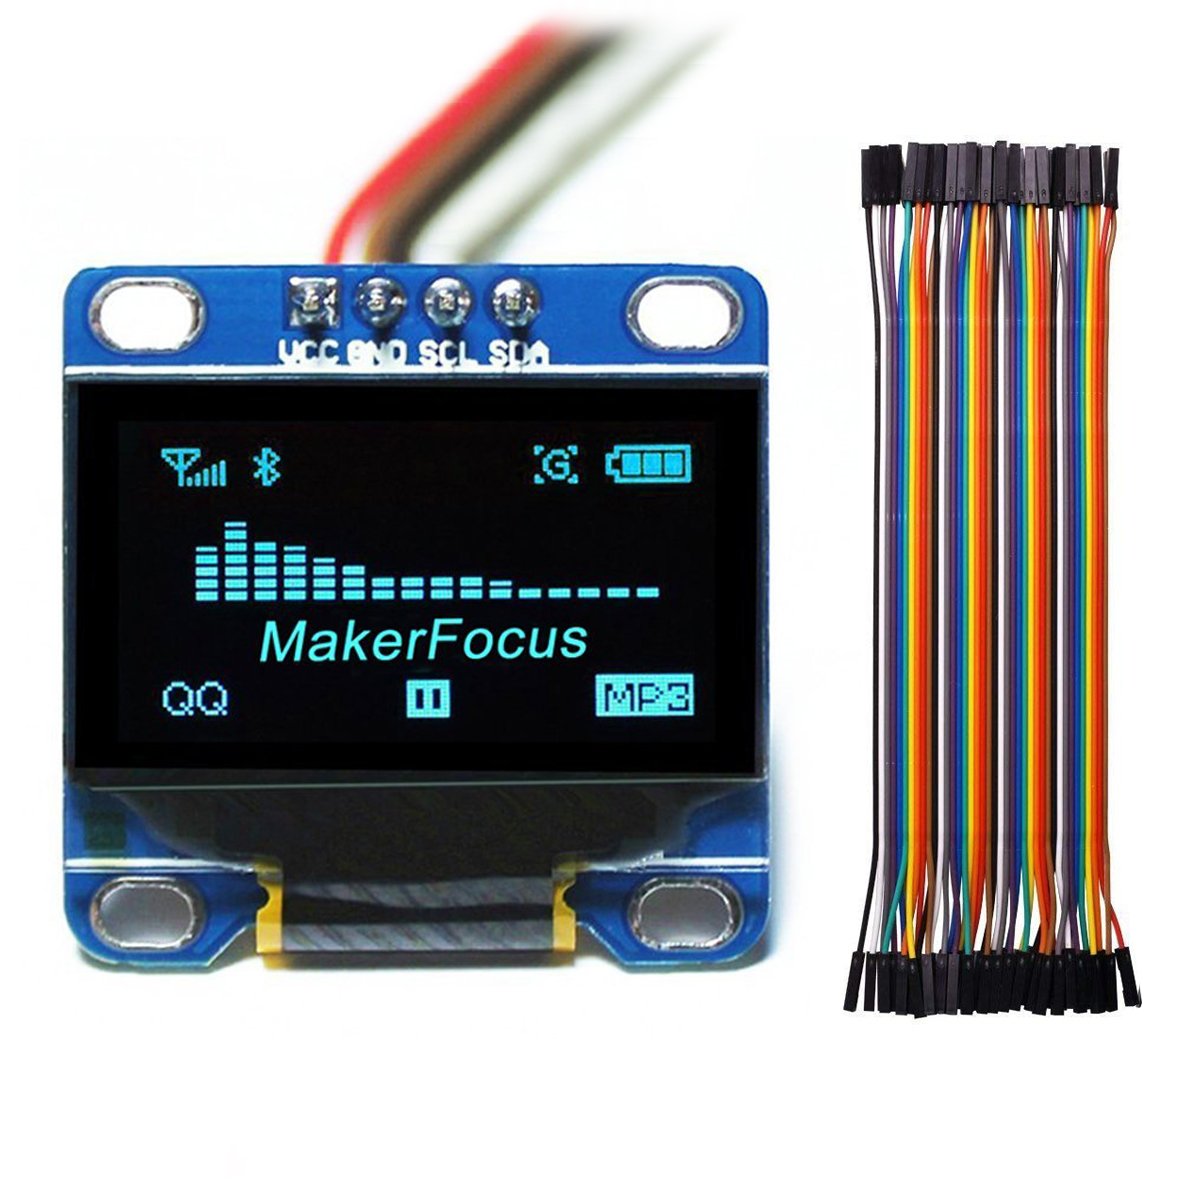 MakerFocus 0.96 Inch IIC Serial OLED Display 128*64 for Arduino with 4